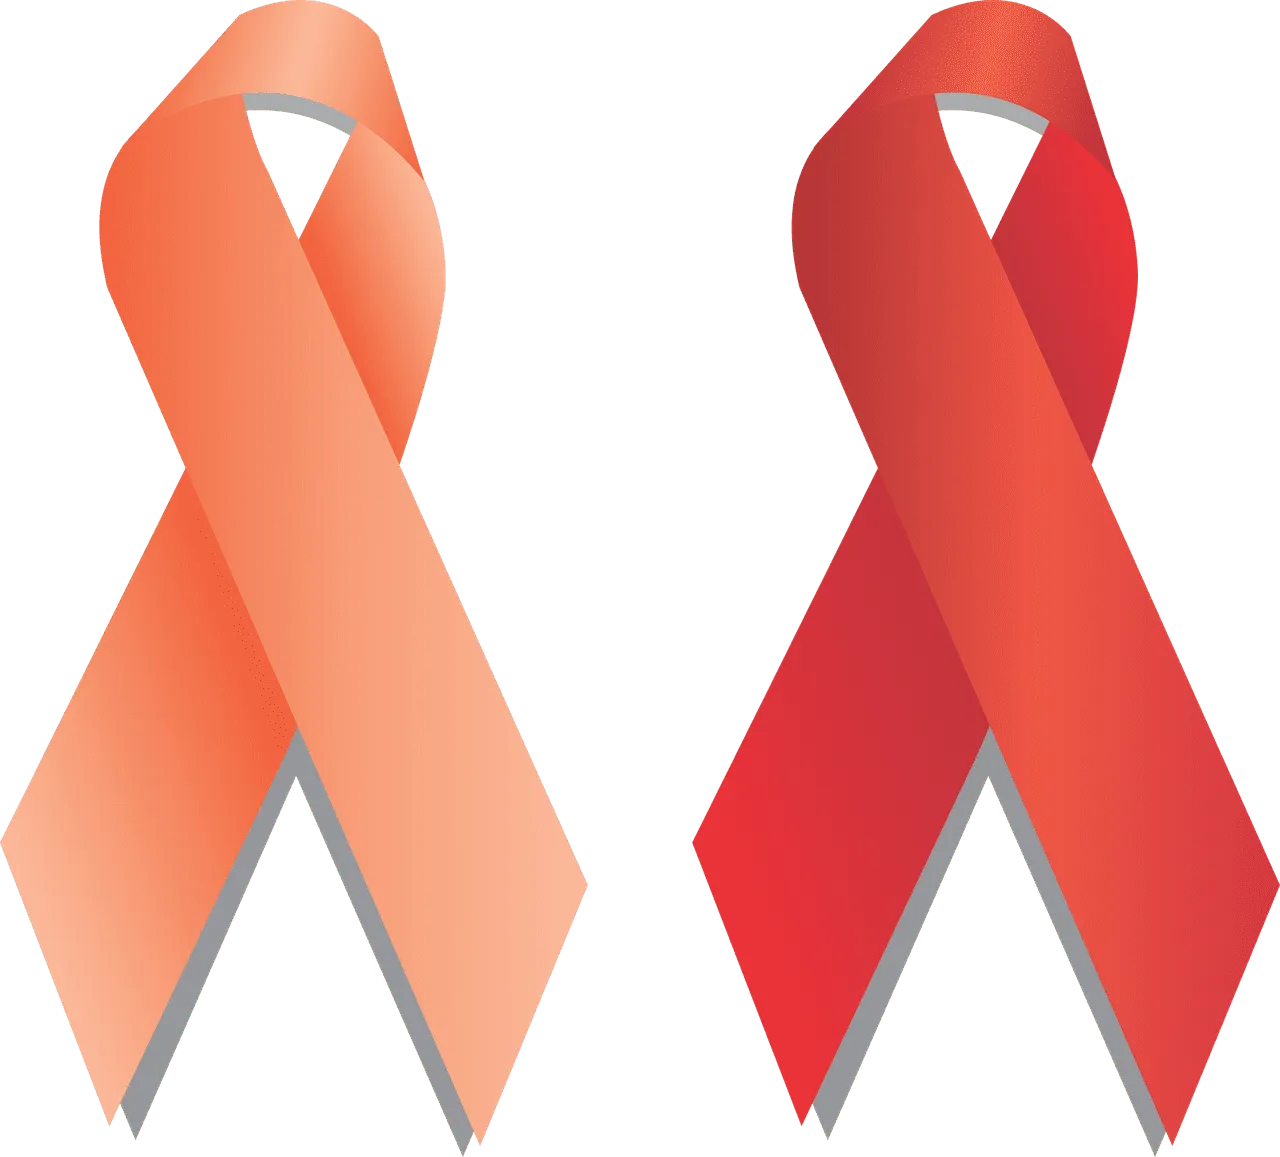 Orange Ribbons are worn on Color The World Orange Day to raise awareness about CRPS/RSD.